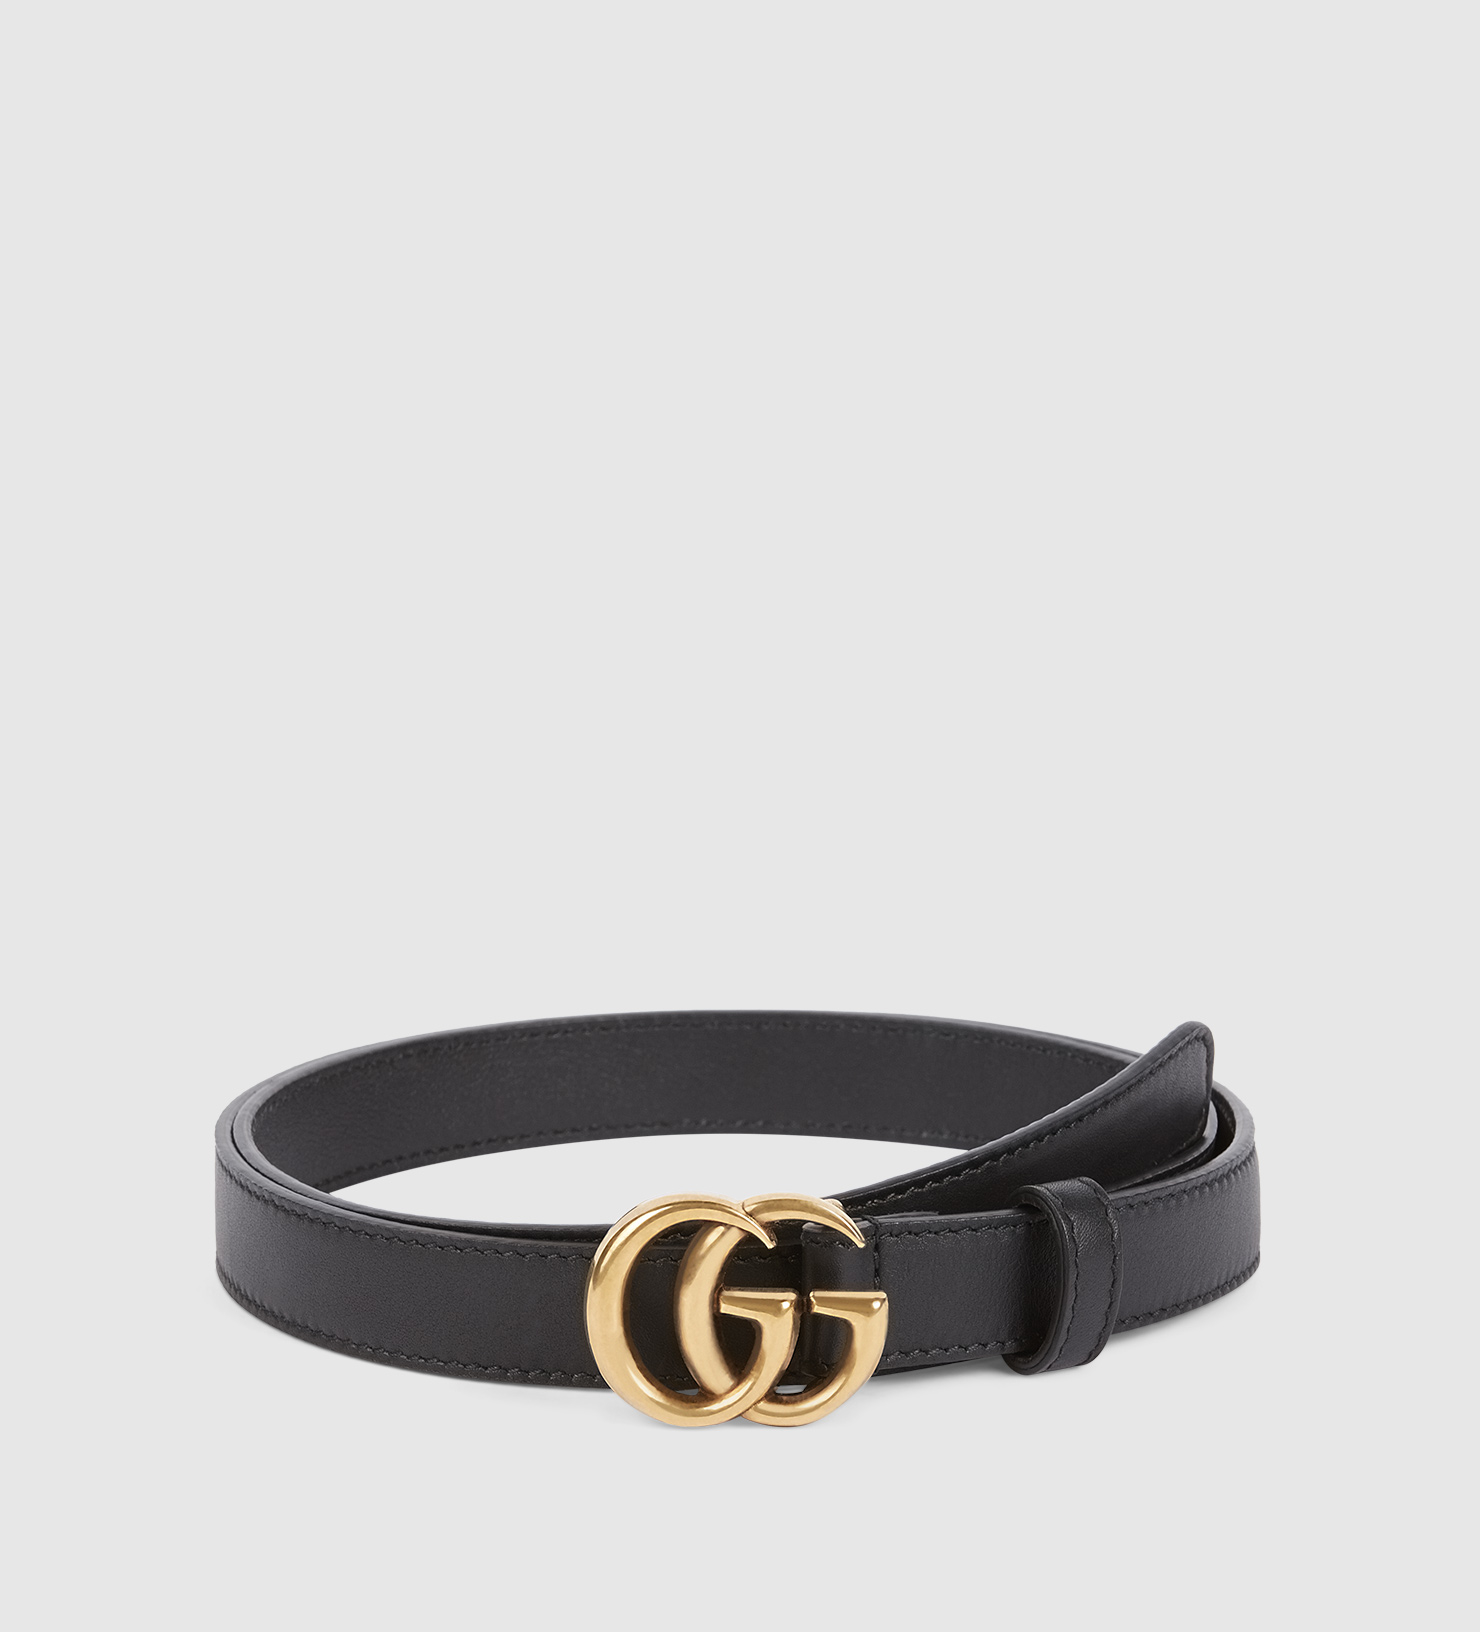 Gucci Leather Belt With Double G Buckle in Metallic | Lyst